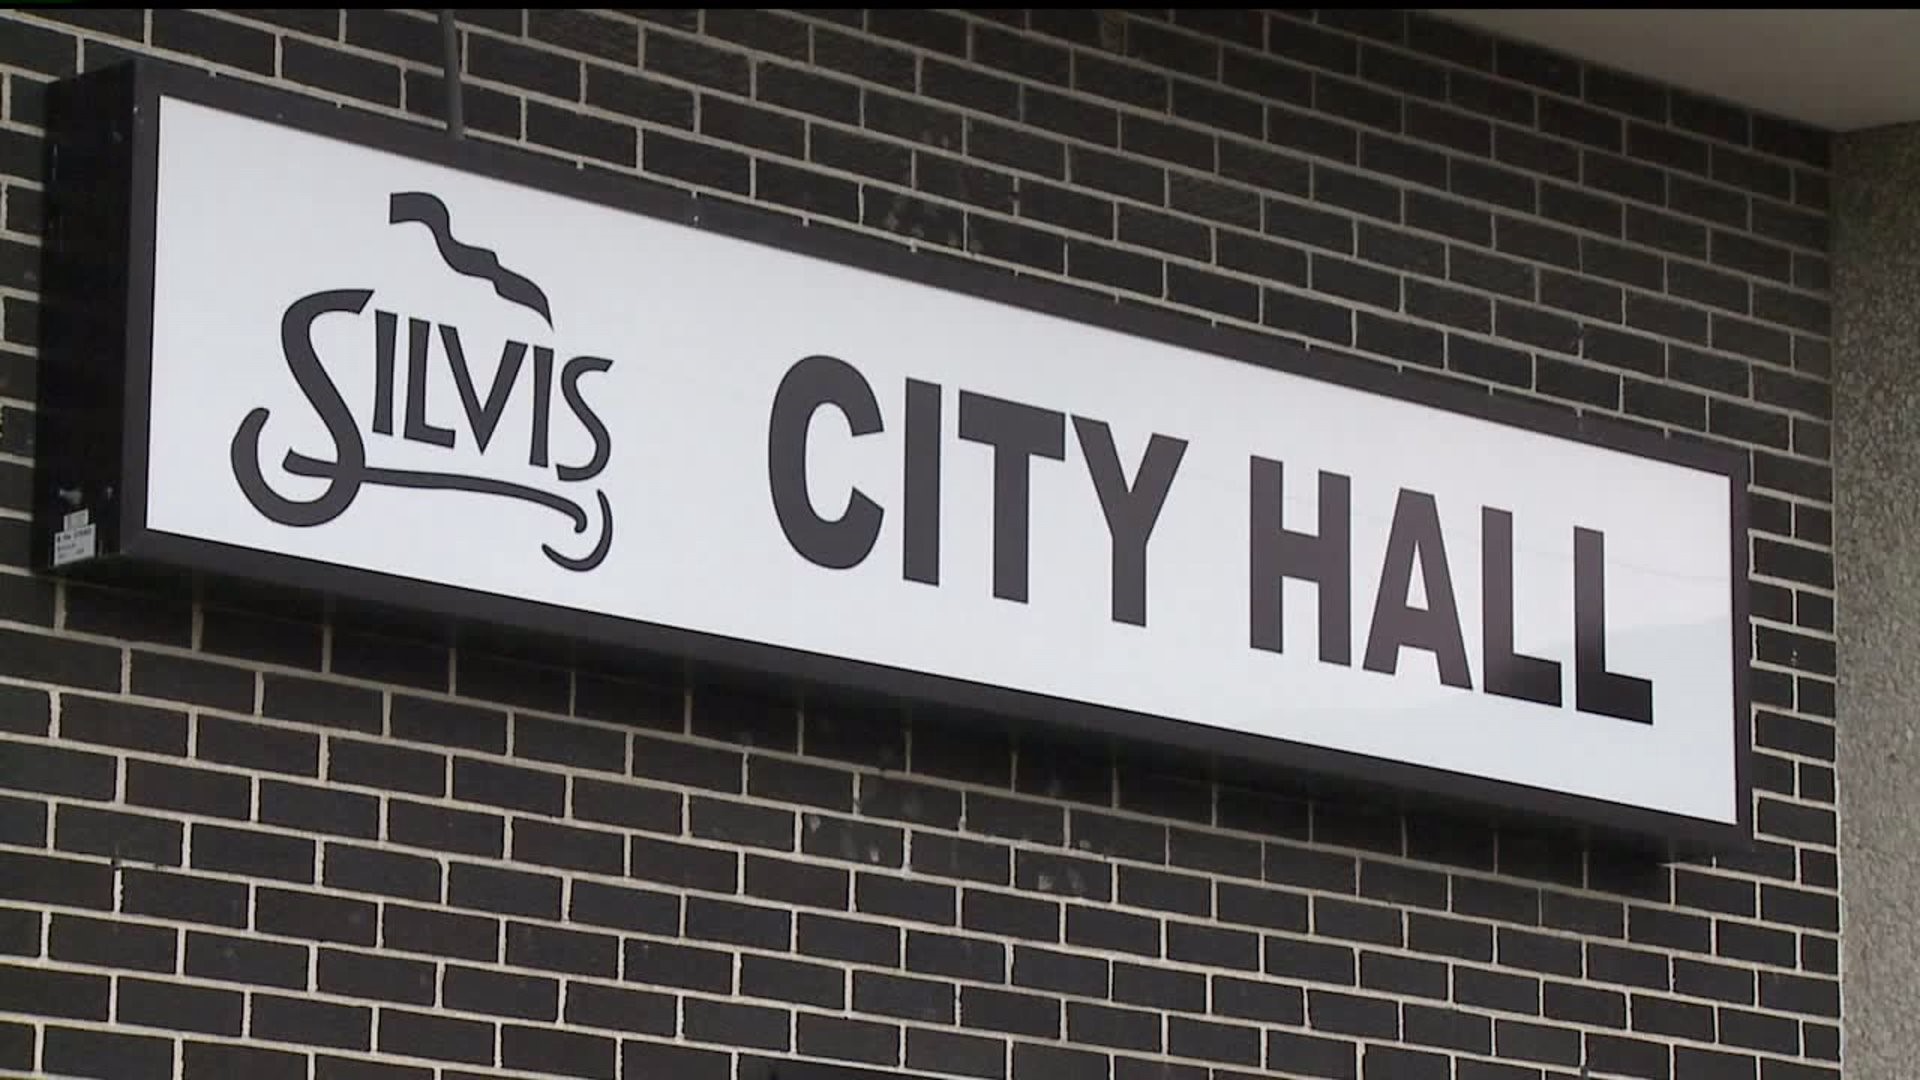 City of Silvis passes resolution for a safe, diverse